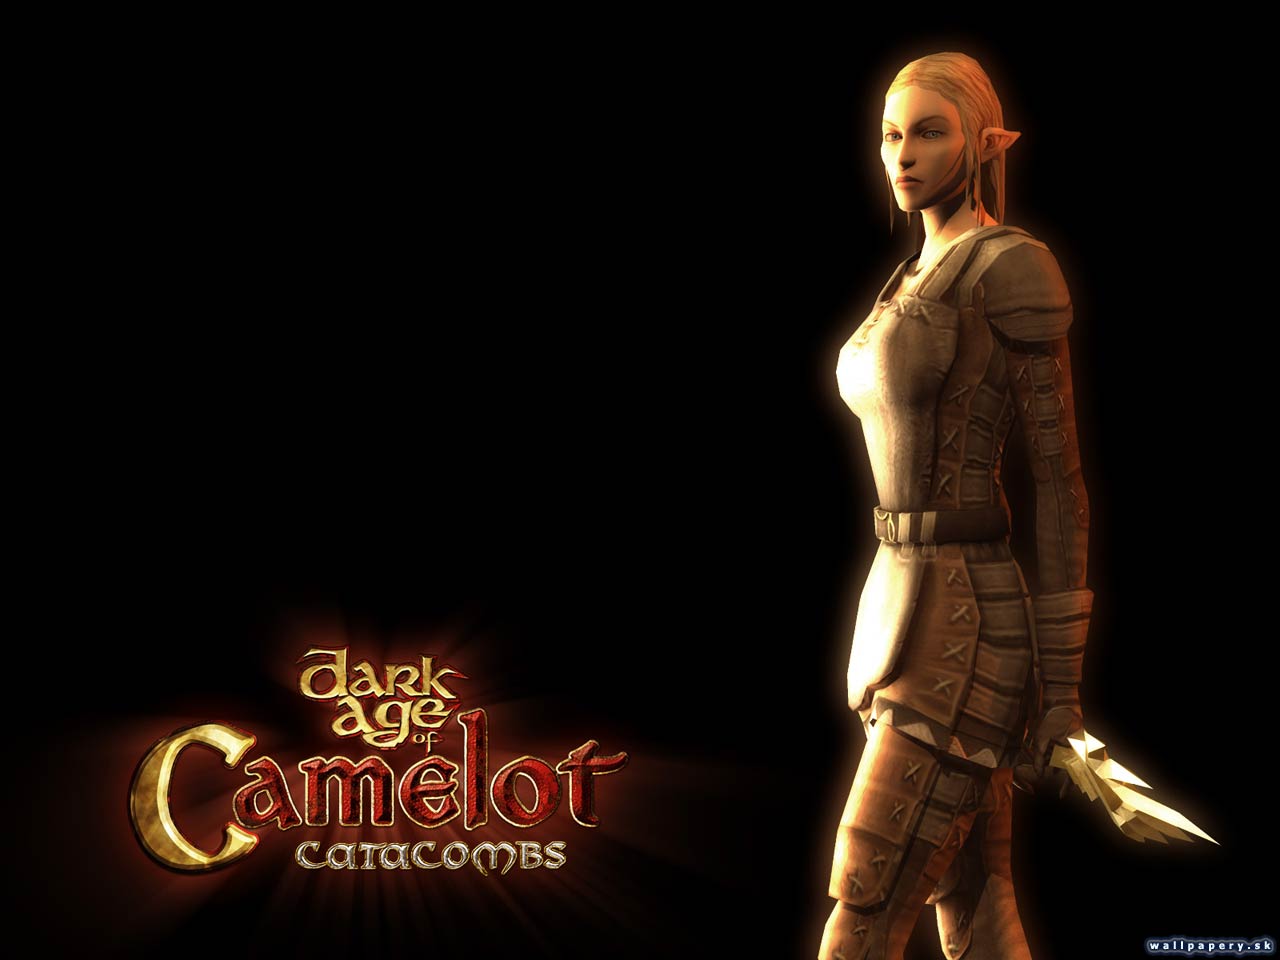 Dark Age of Camelot: Catacombs - wallpaper 4